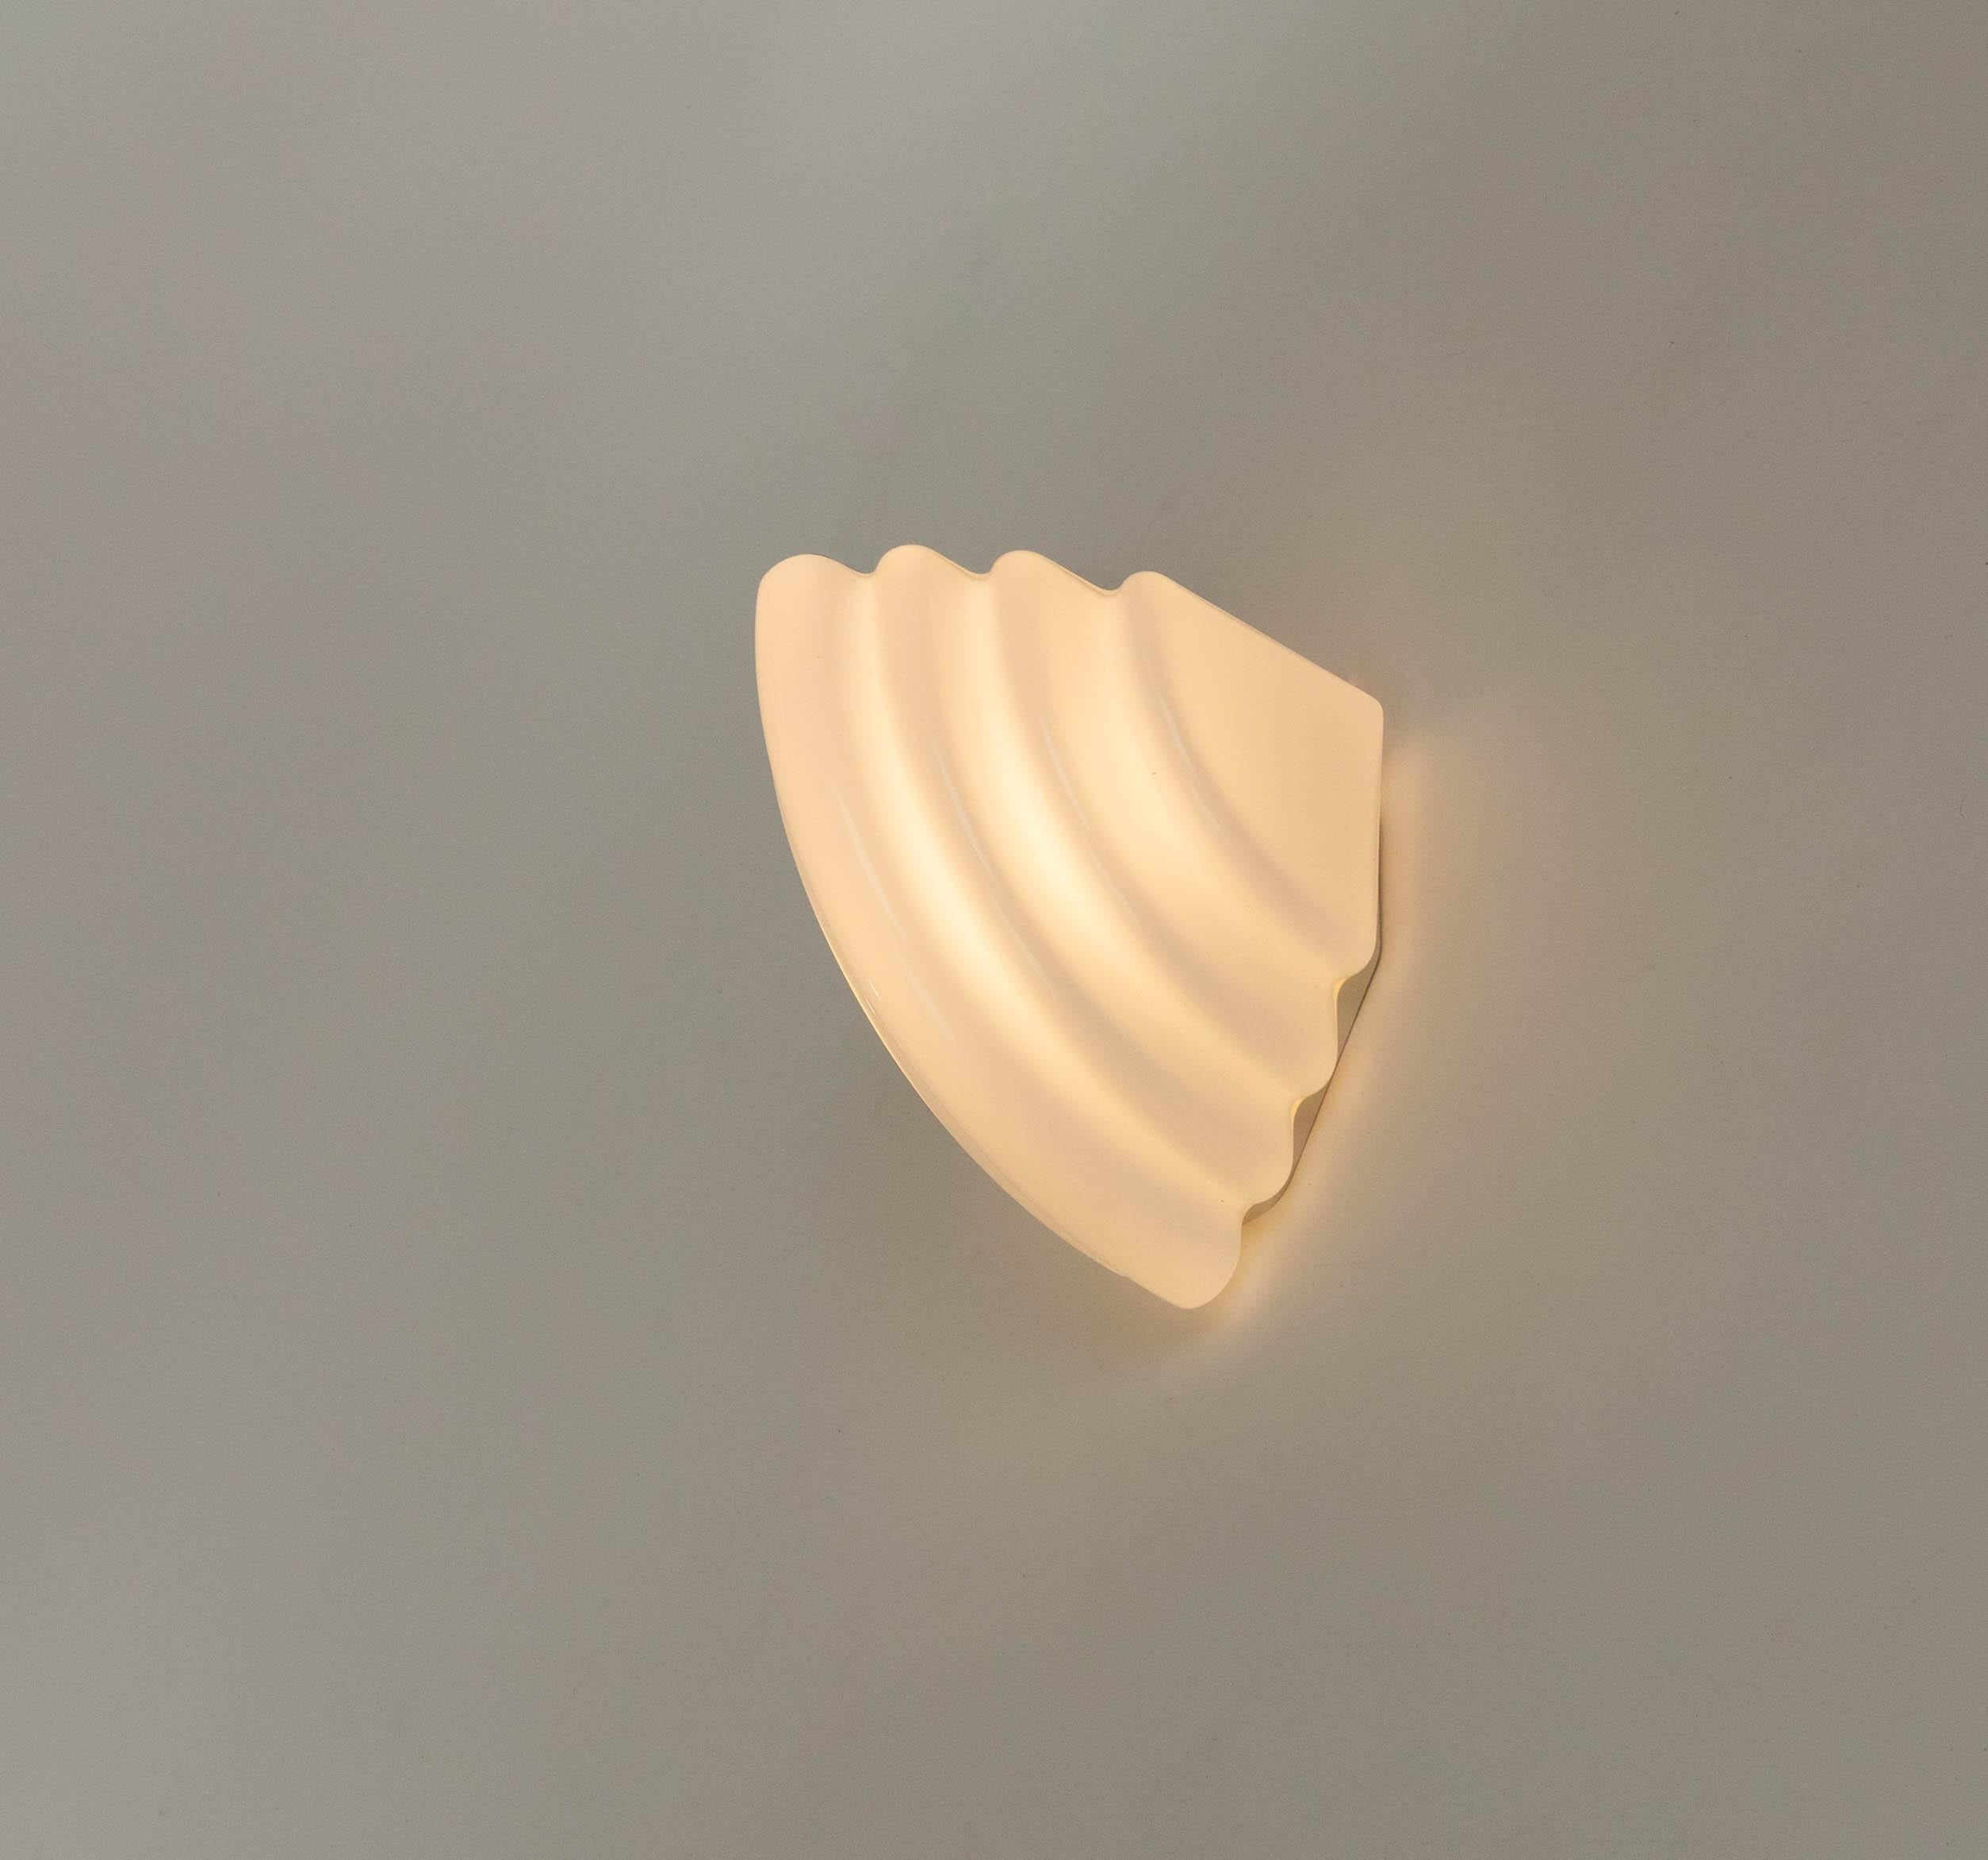 Kai wall lamp designed by Kazuhide Takahama in 1985 and produced by Sirrah.

The model consists of an opaline glass shade and a plastic suspension base. Later versions of this model were made of acrylic and of metal.

The half bowed Kai can be